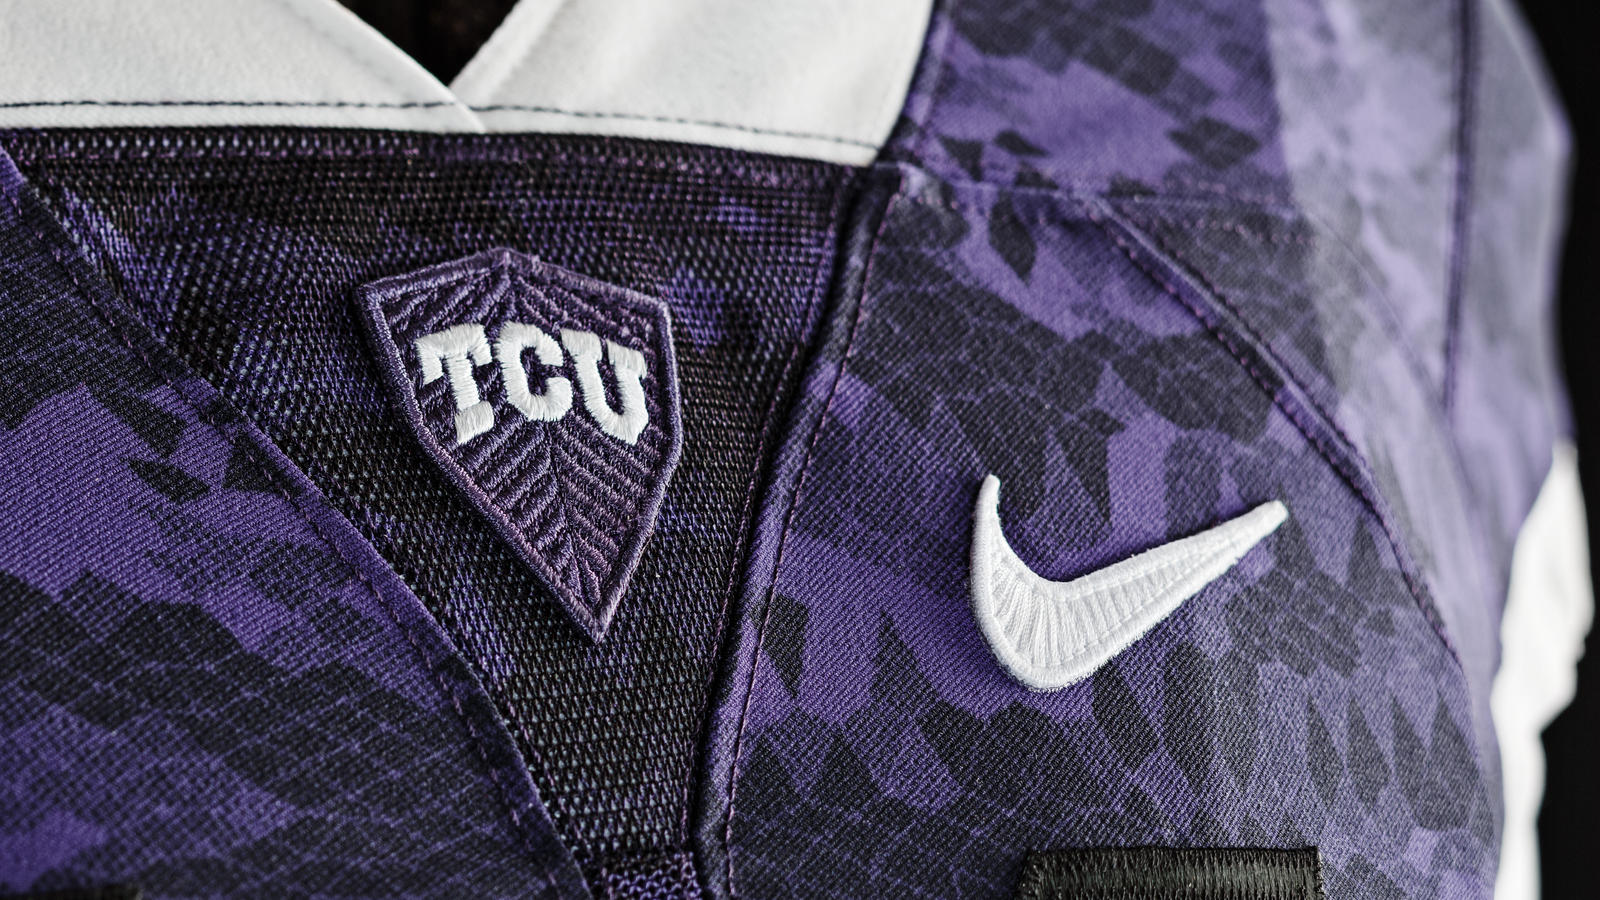 TCU Football: Horned Frogs takes uniforms to new level with fresh ...